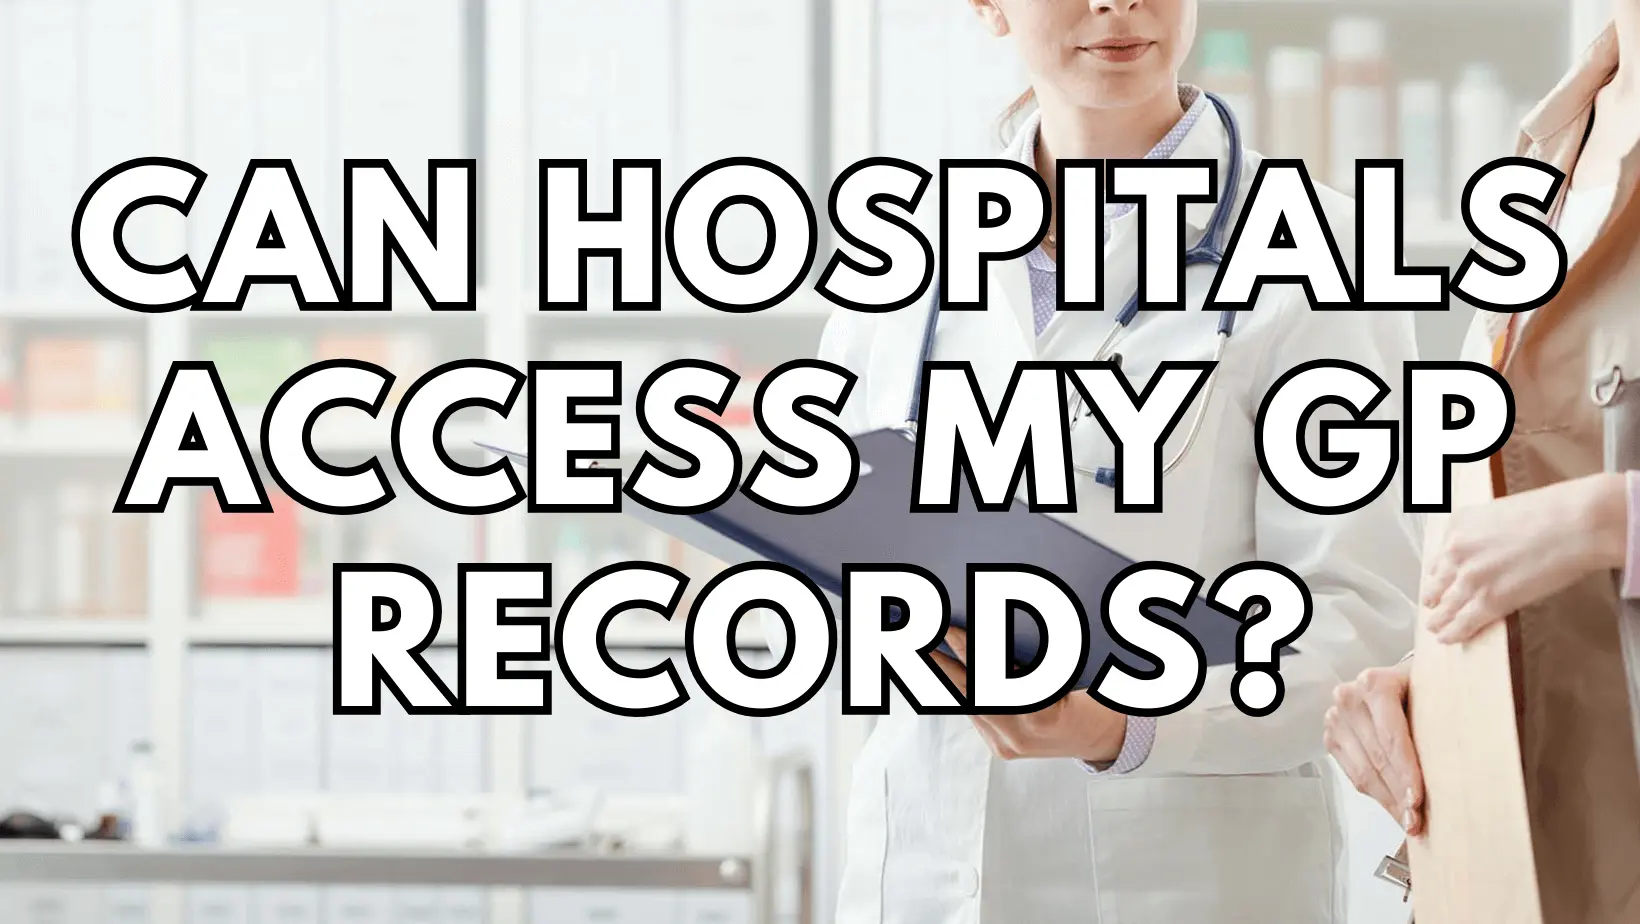 Can Hospitals Access My GP Records